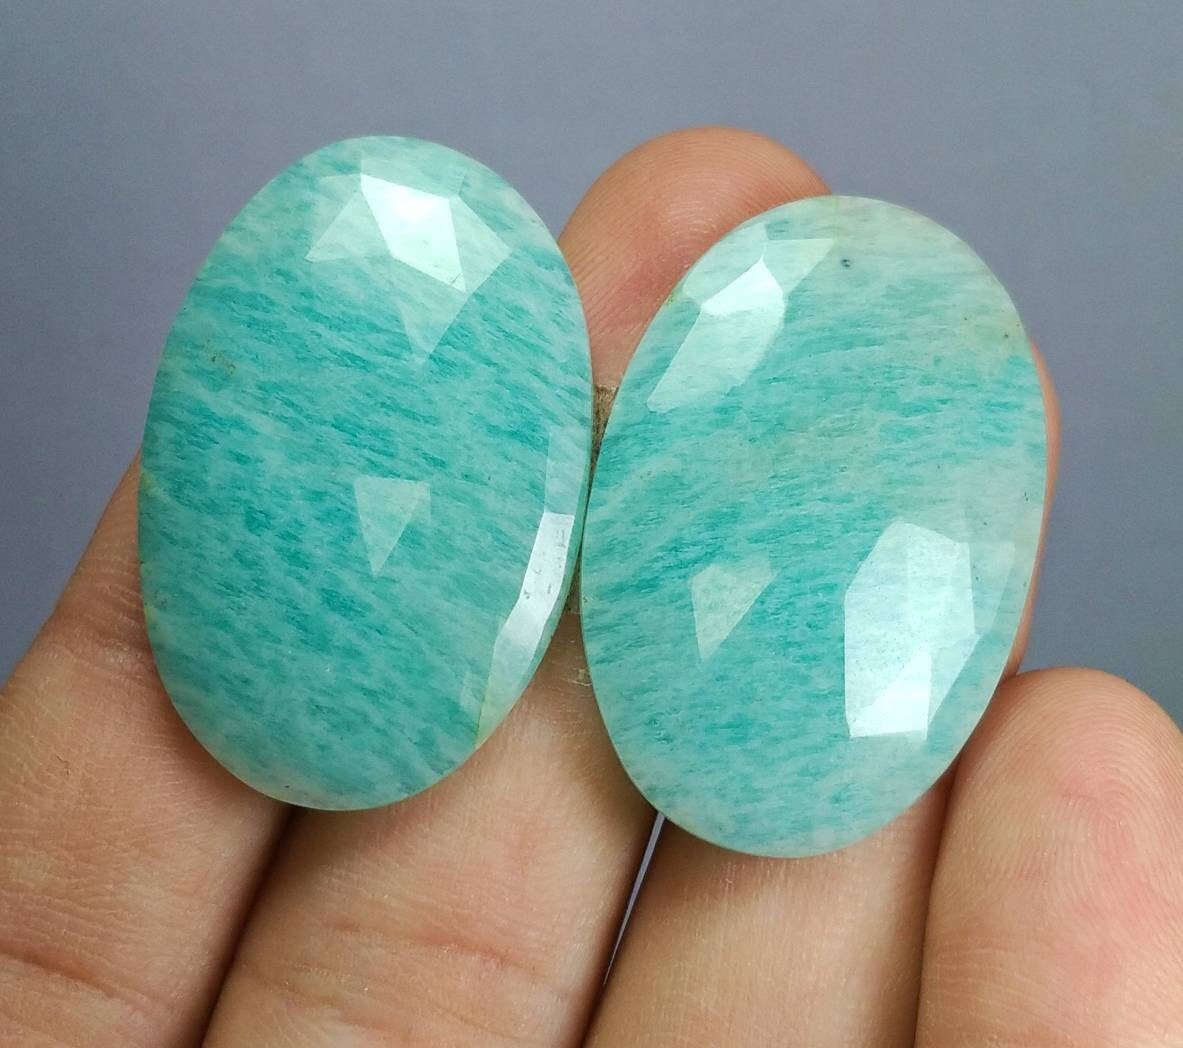 ARSAA GEMS AND MINERALSNatural fine quality beautiful 54 carats pair of rose cut Faceted oval shapes amazonite Cabochons - Premium  from ARSAA GEMS AND MINERALS - Just $20.00! Shop now at ARSAA GEMS AND MINERALS